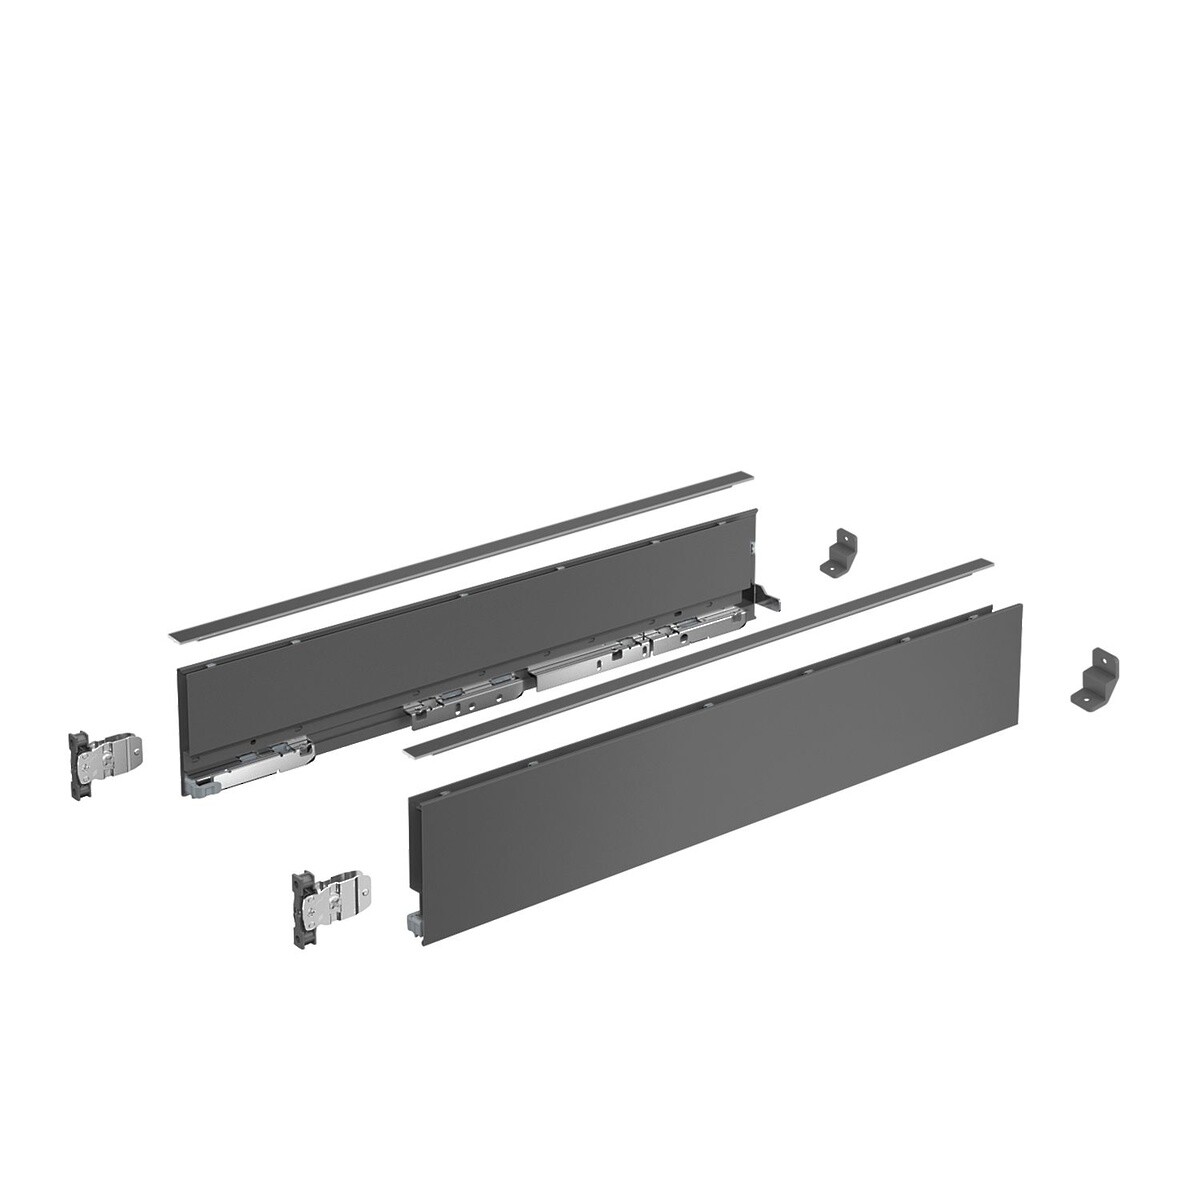 AvanTech YOU Drawer side profile set, height 101 mm x NL 300 mm, Anthracite, Left and Right